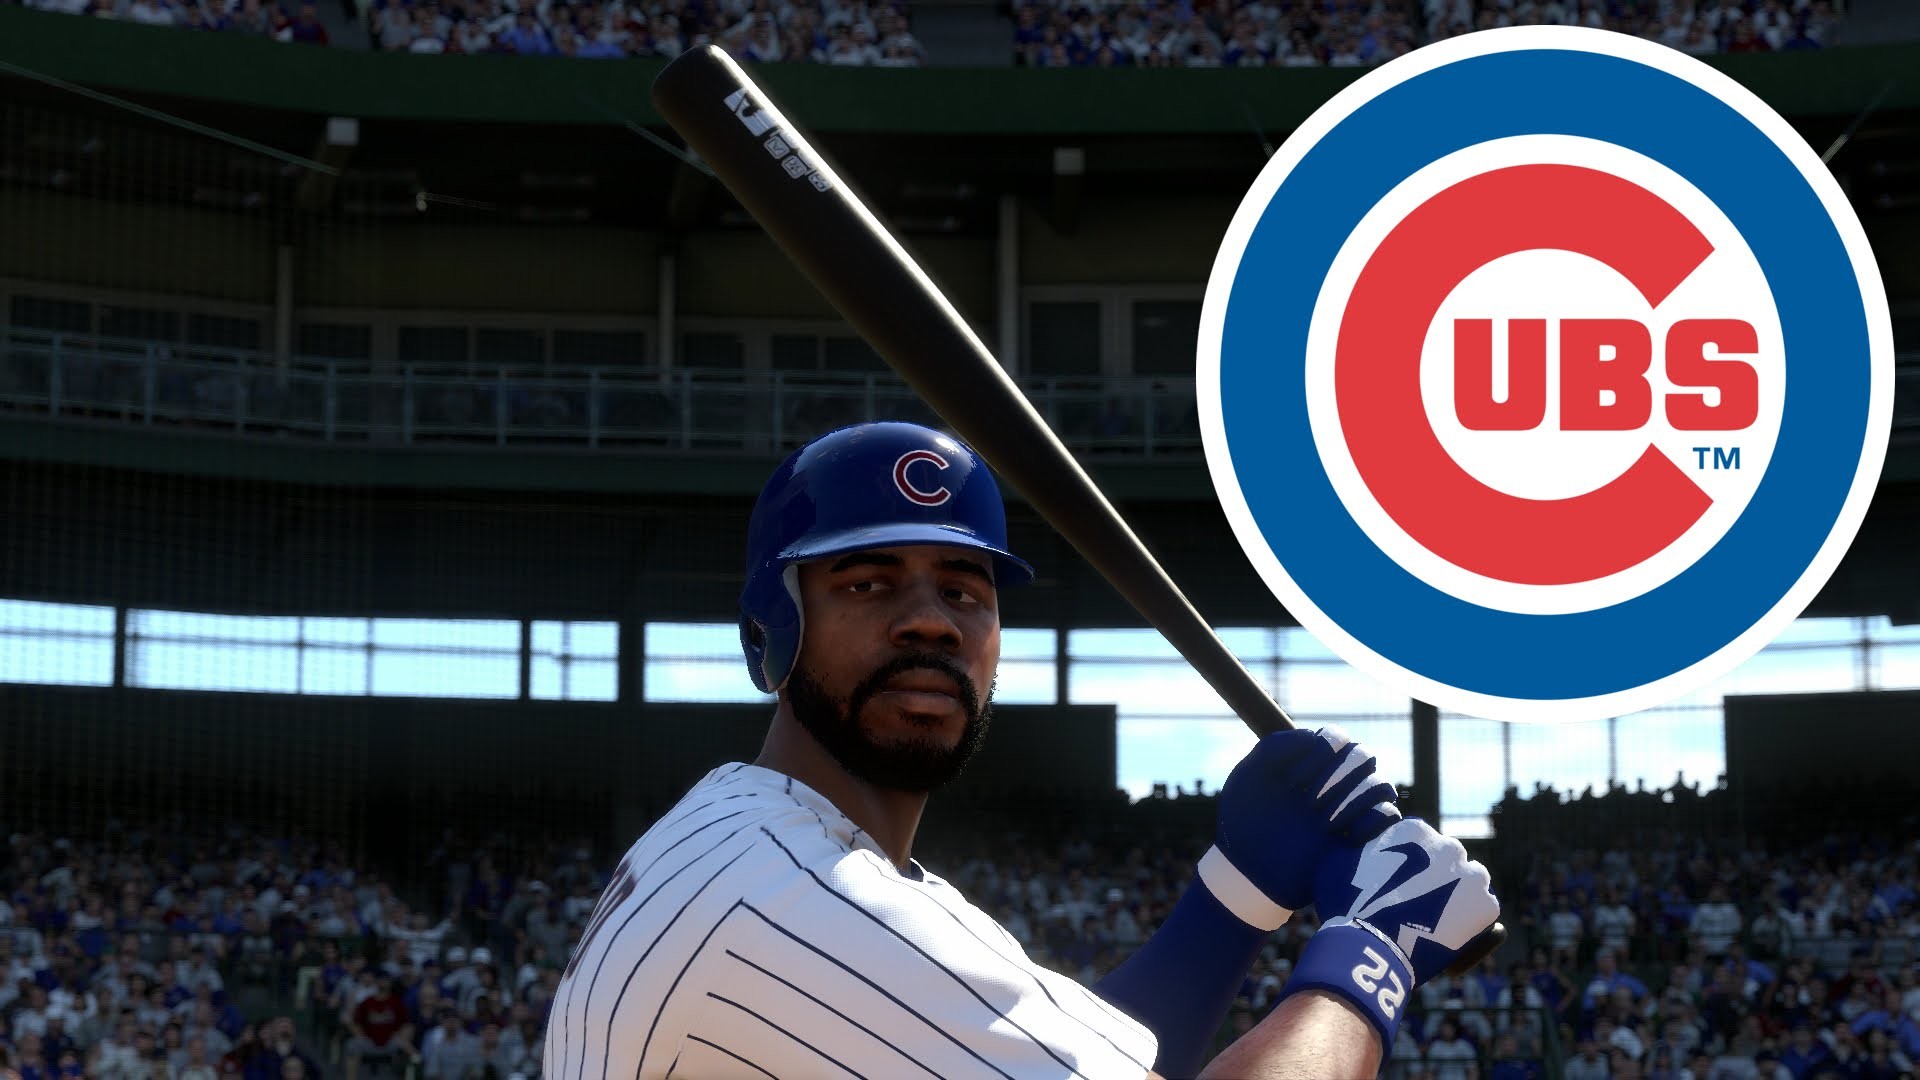 1920x1080 Filename: Wallpapers-HD-Chicago-Cubs-Backgrounds.jpg